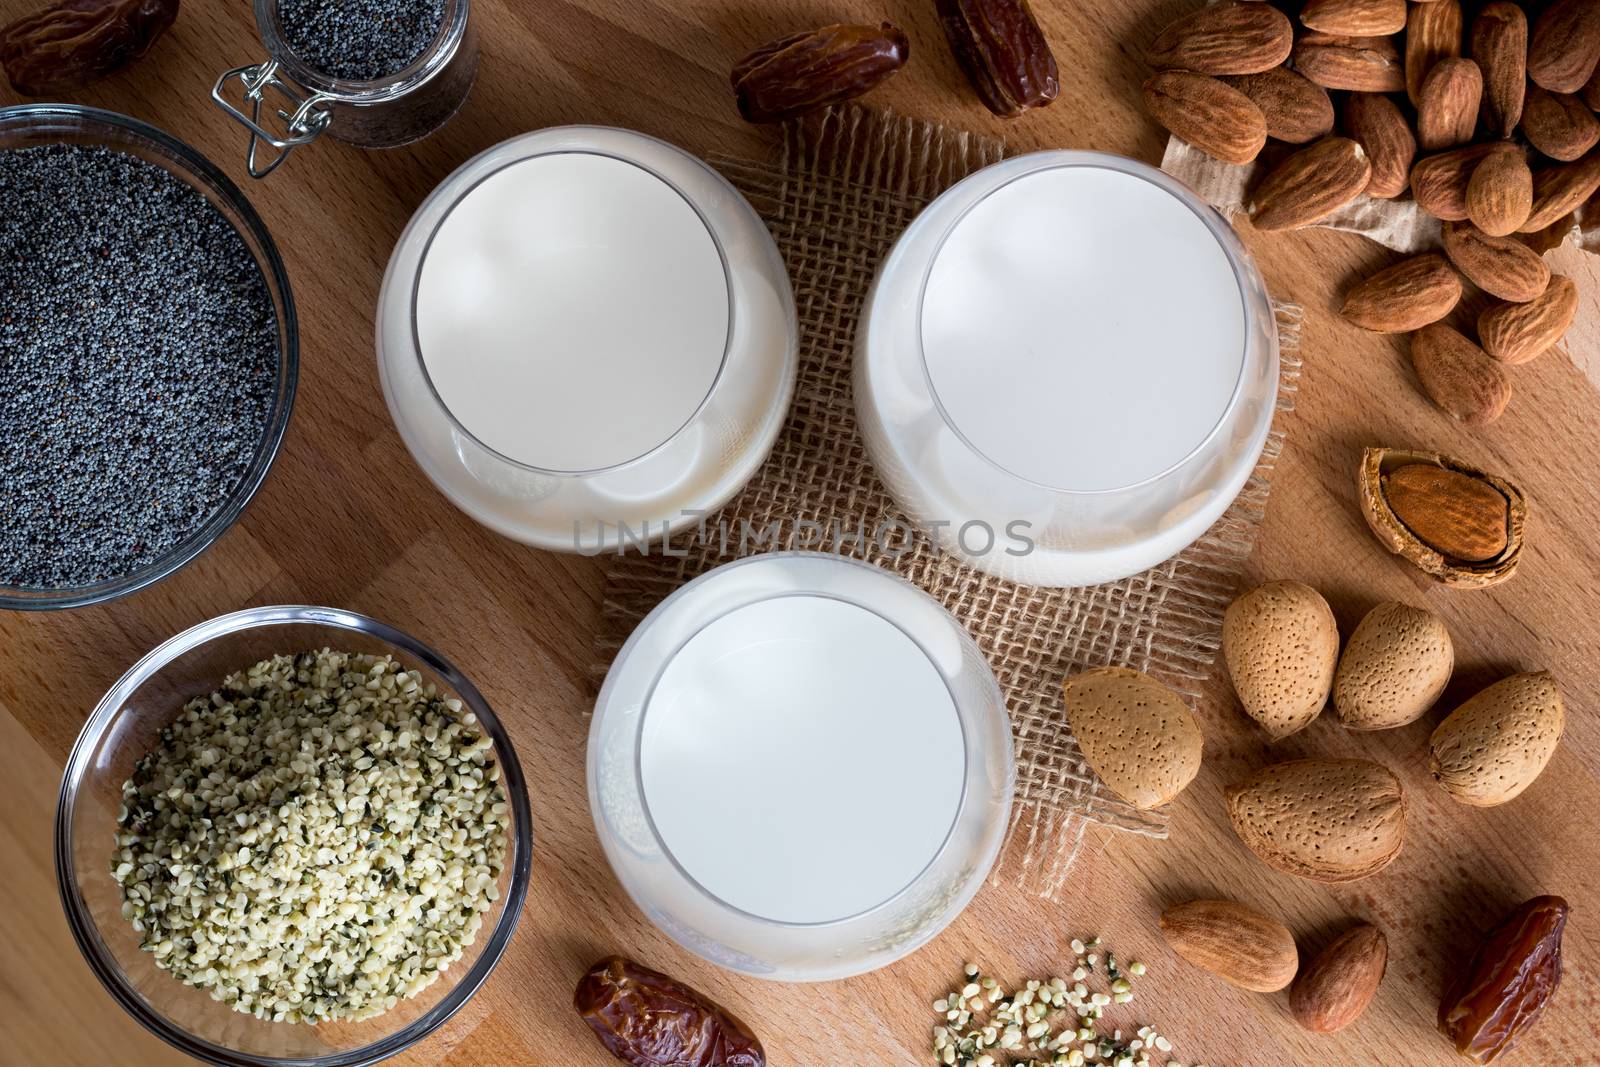 Top view of three glasses of vegan plant milk - almond milk, poppy seed milk and hemp seed milk, with shelled and unshelled almonds, poppy seeds, hemp seeds and dates on a wooden table